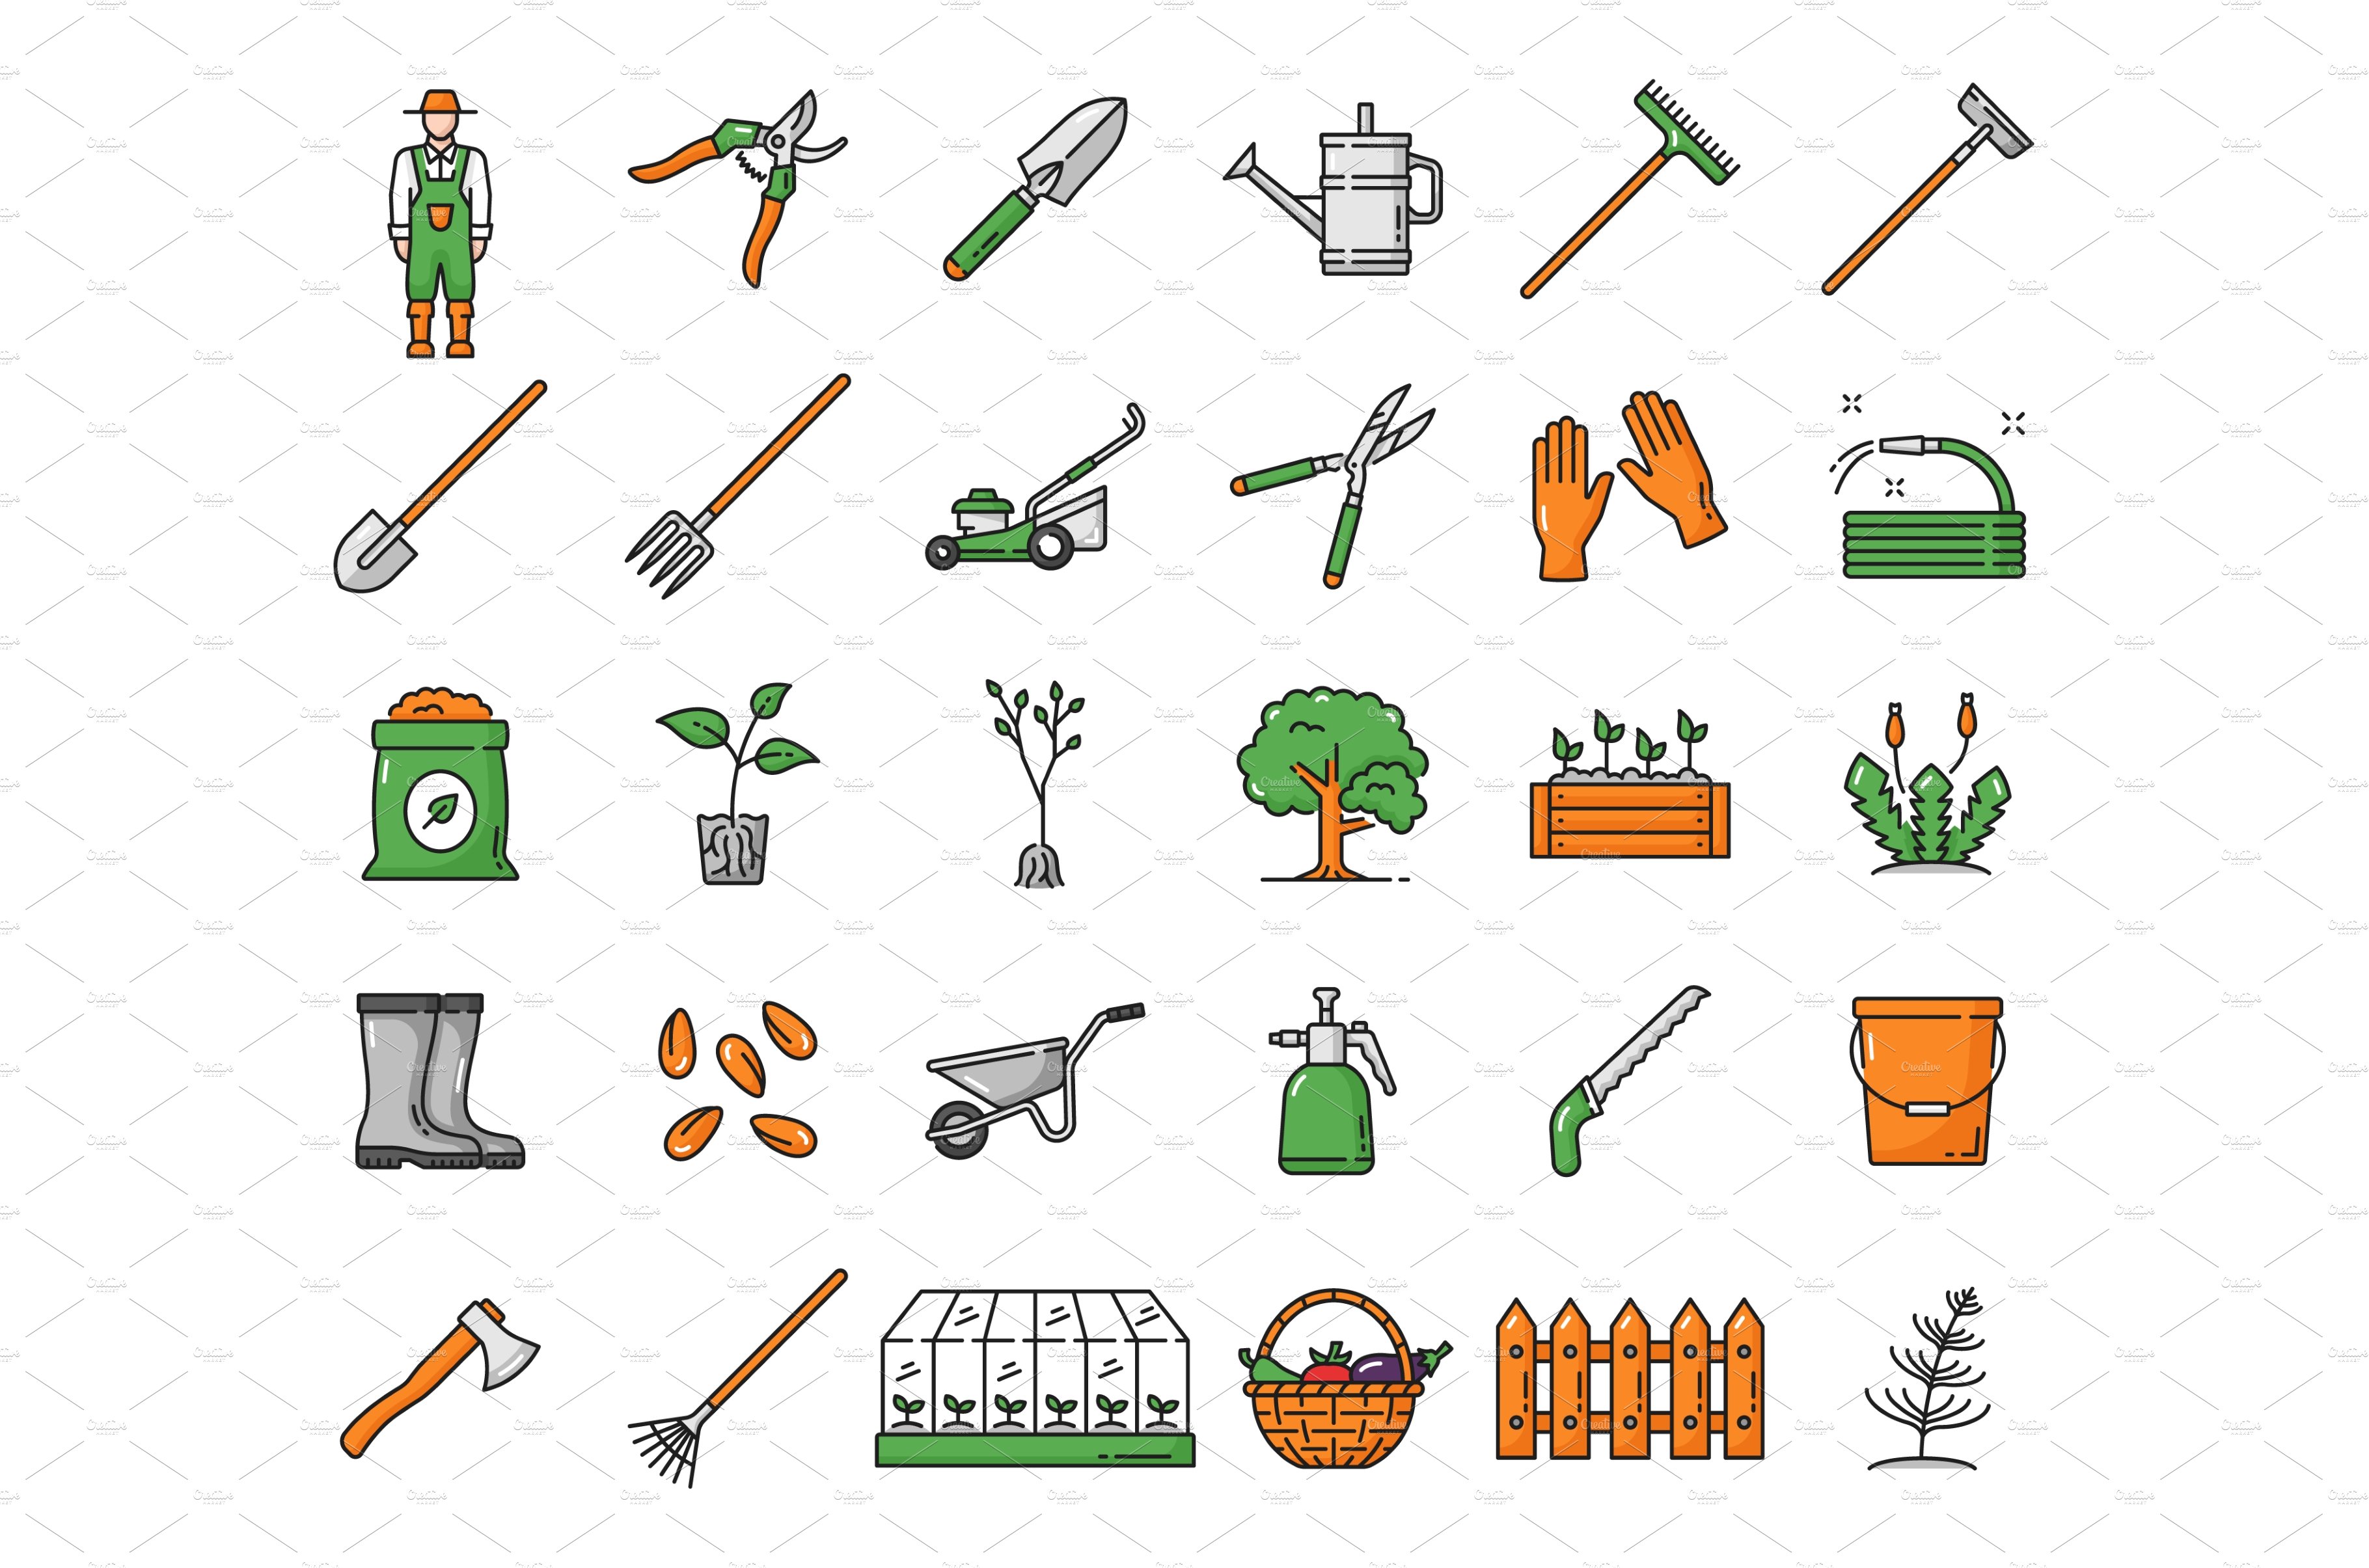 Farming tools painting Black and White Stock Photos & Images - Alamy